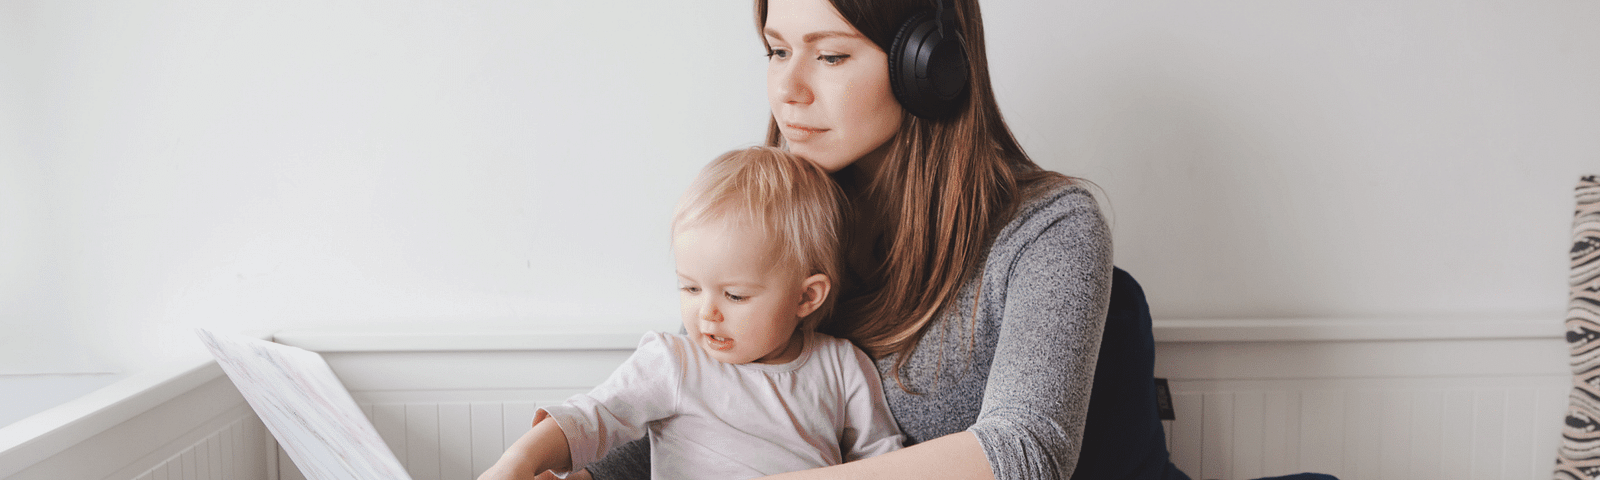 Woman sitting crossed legged on the floor, wearing a headset. She’s balancing a laptop on one knee and she has a baby sitting on her lap while she’s trying to type.